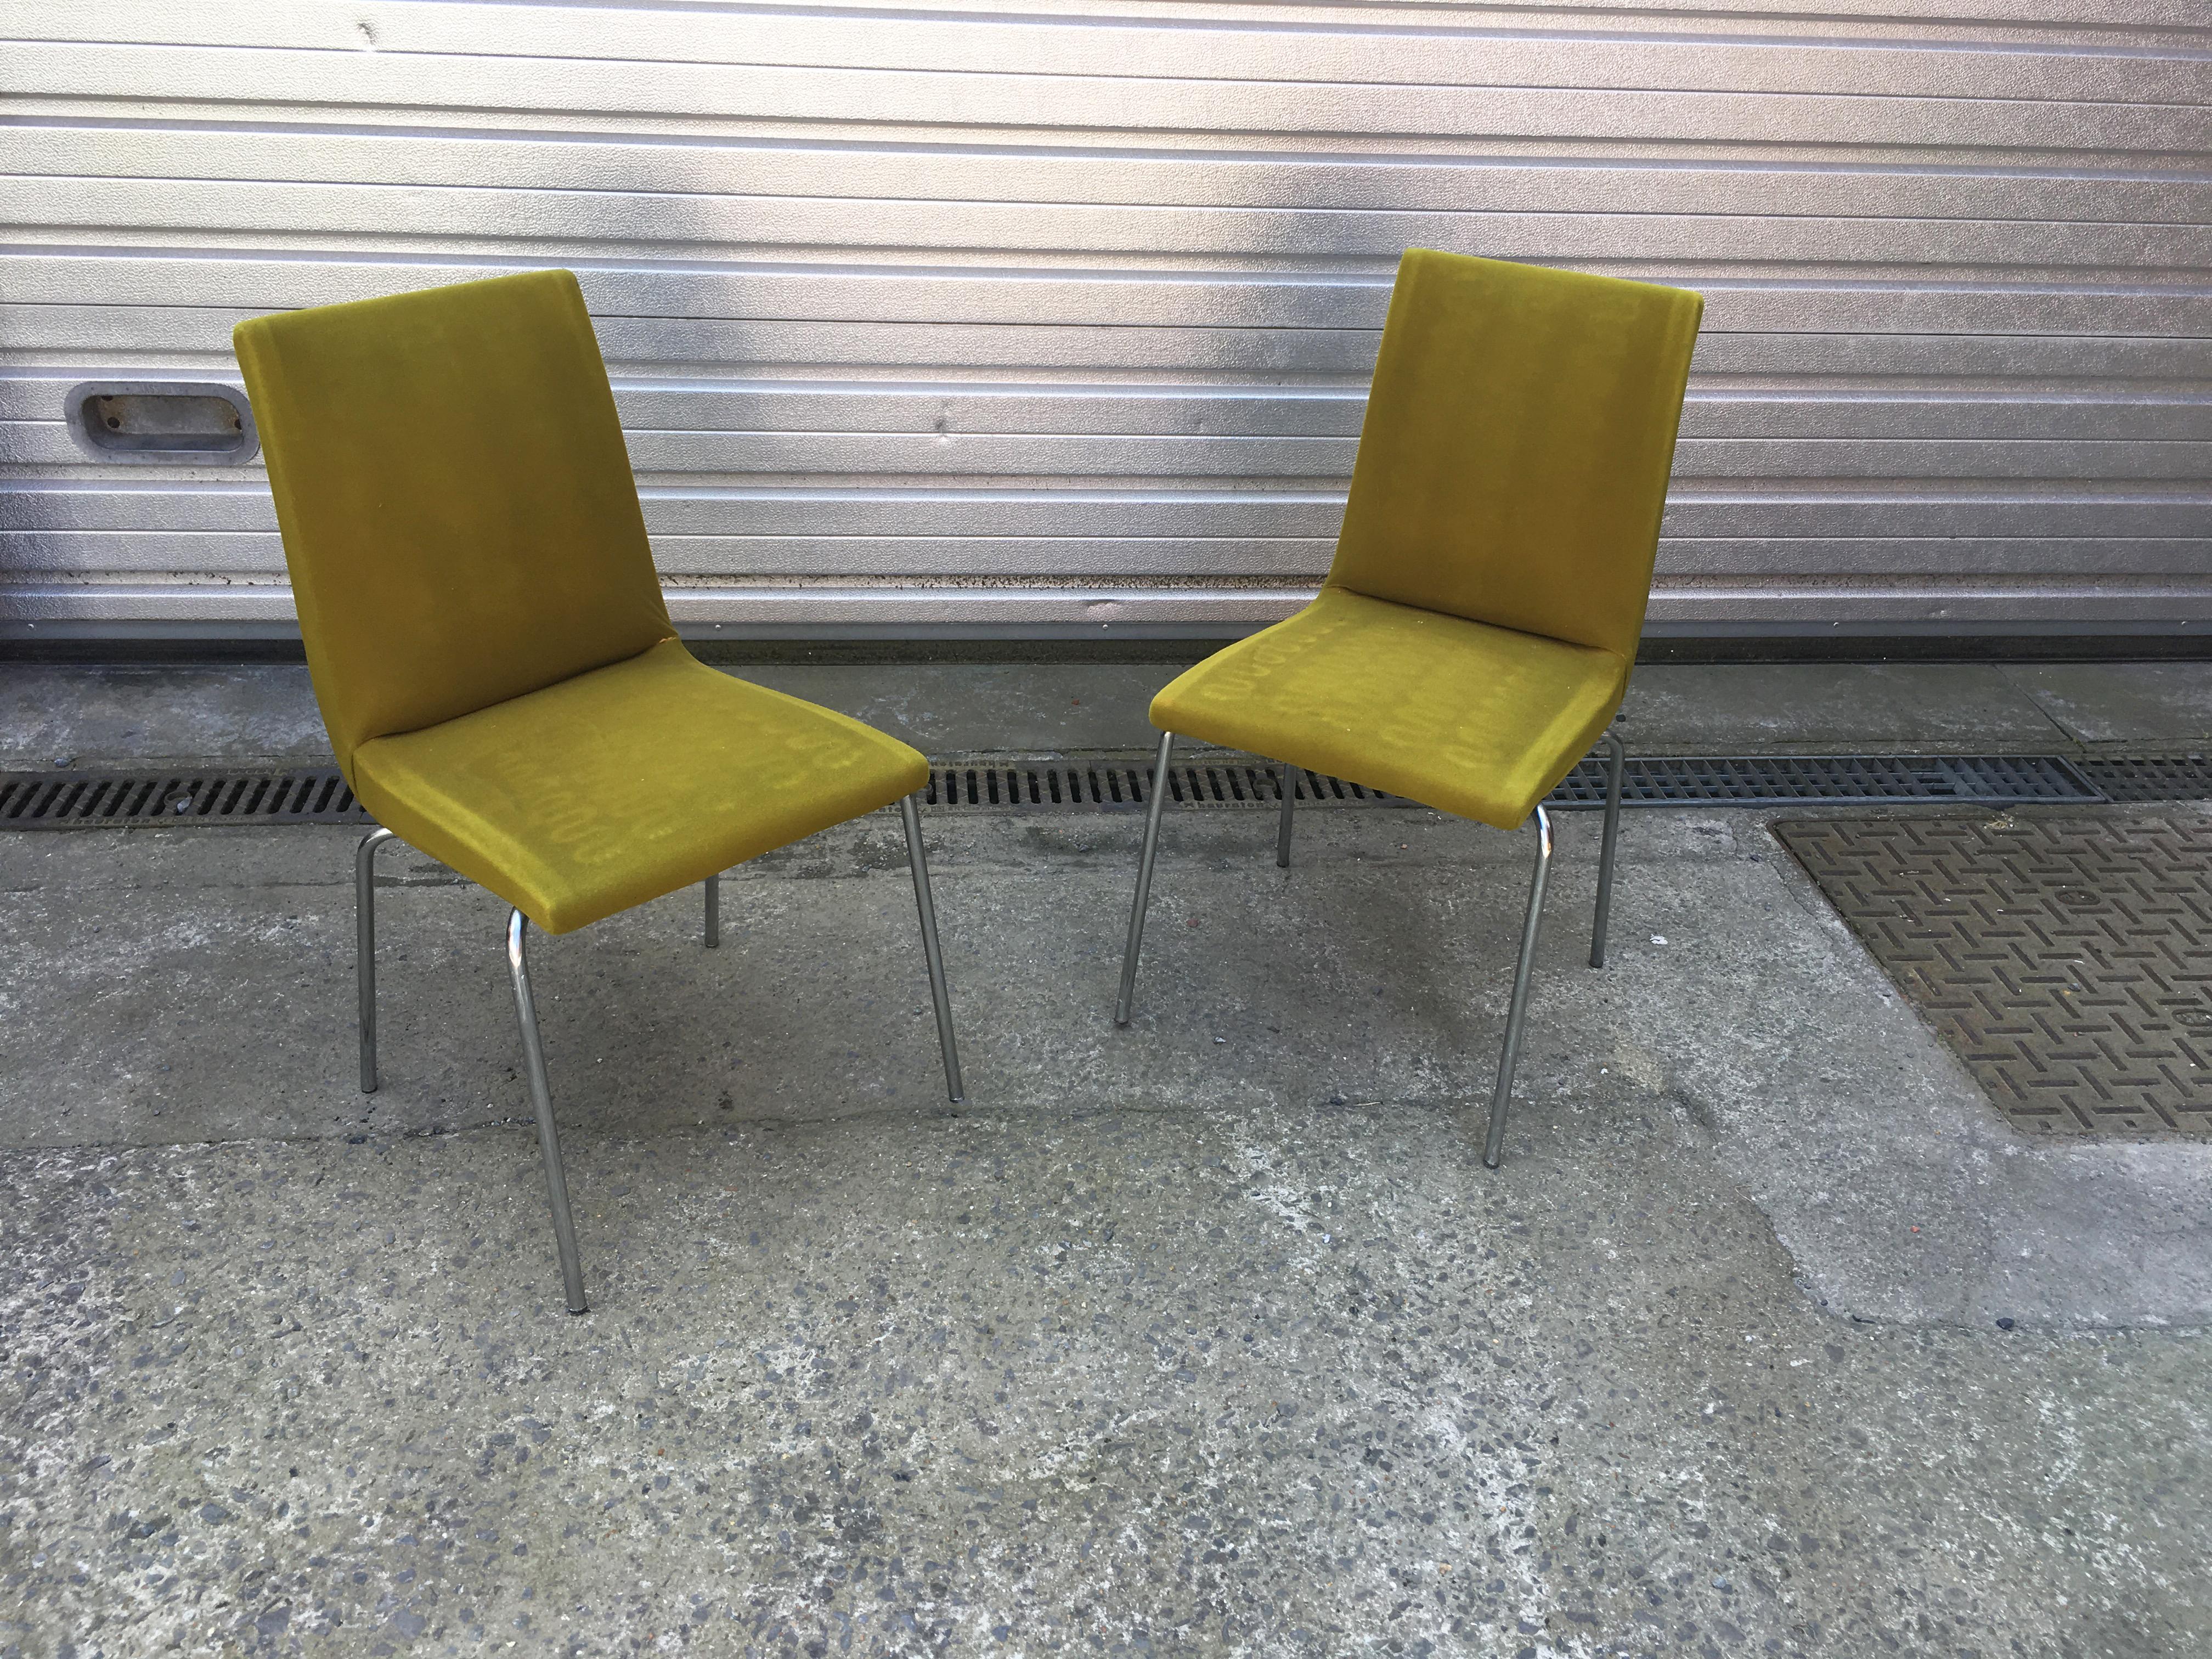 Suite of 4 chairs Paulin style, Gipsen, circa 1960
structure and chrome in good condition, fabric to replace.